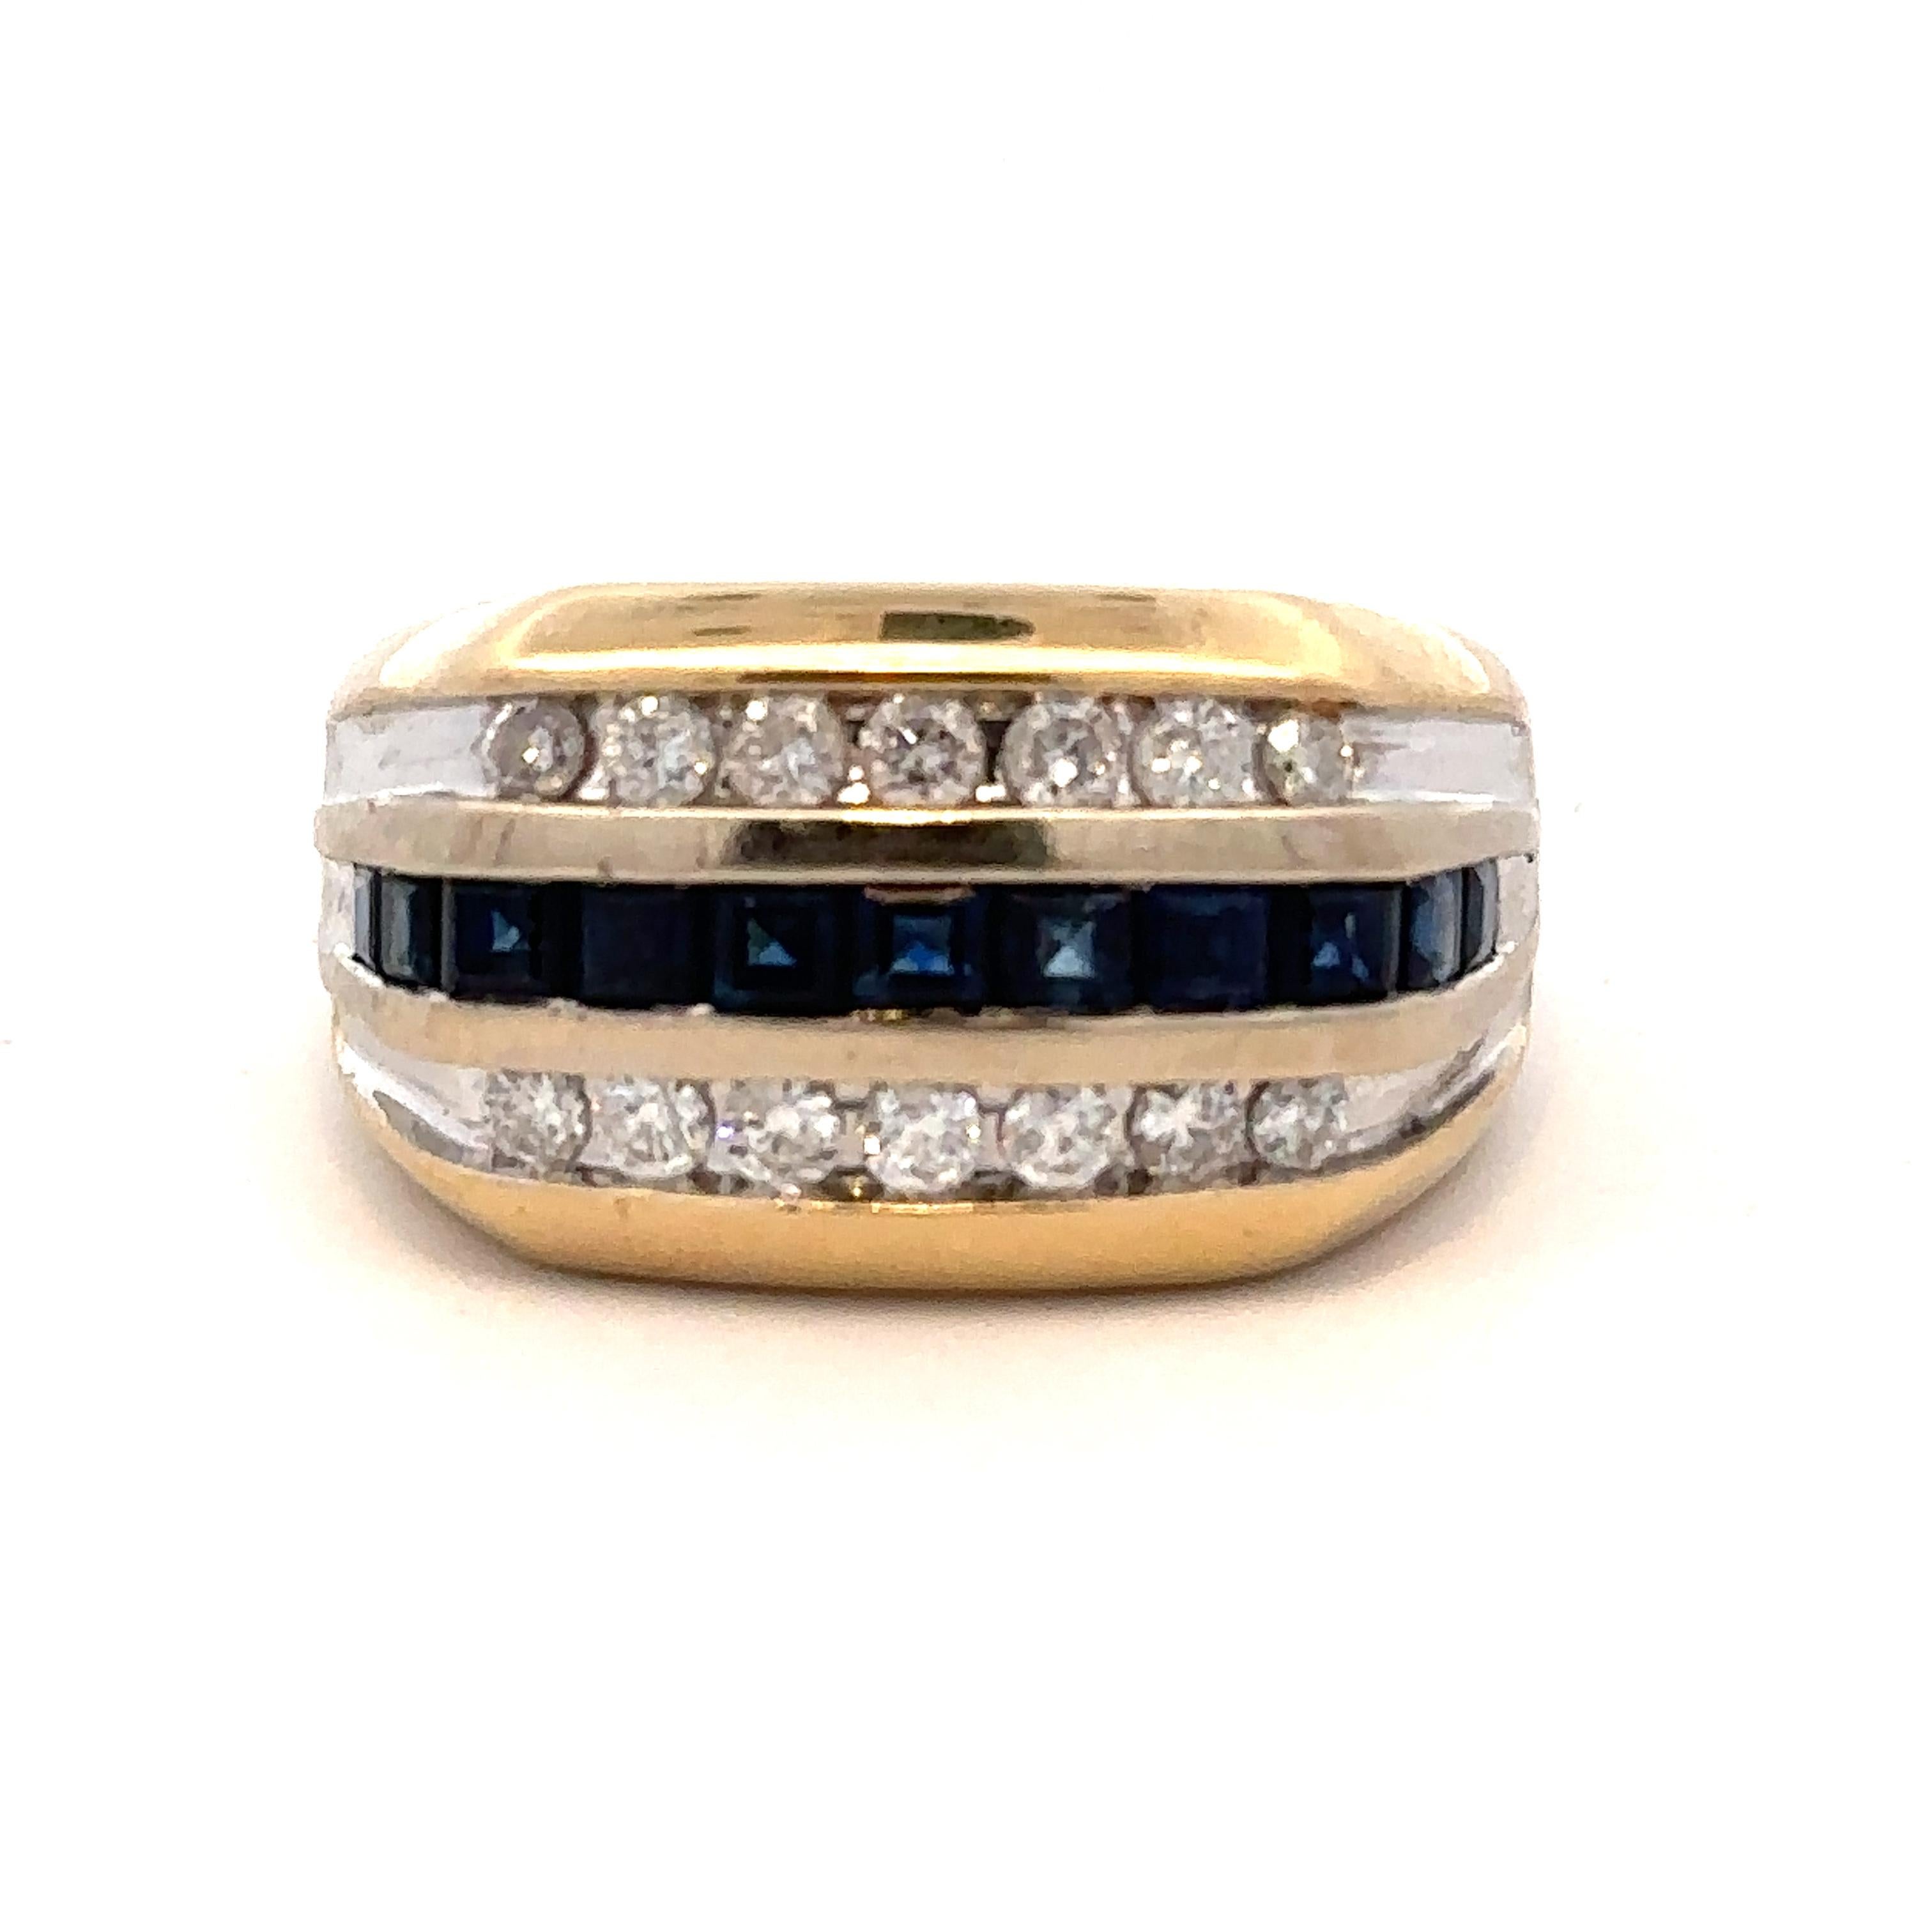 A striking modern setting of sapphires and diamonds in a 14k bi-colored yellow and white gold ring, size 10.5 (sizeable). The diamonds weigh approximately 0.8 ctw, and the sapphires approximately 1.05 cts total (all stones measured in setting). 